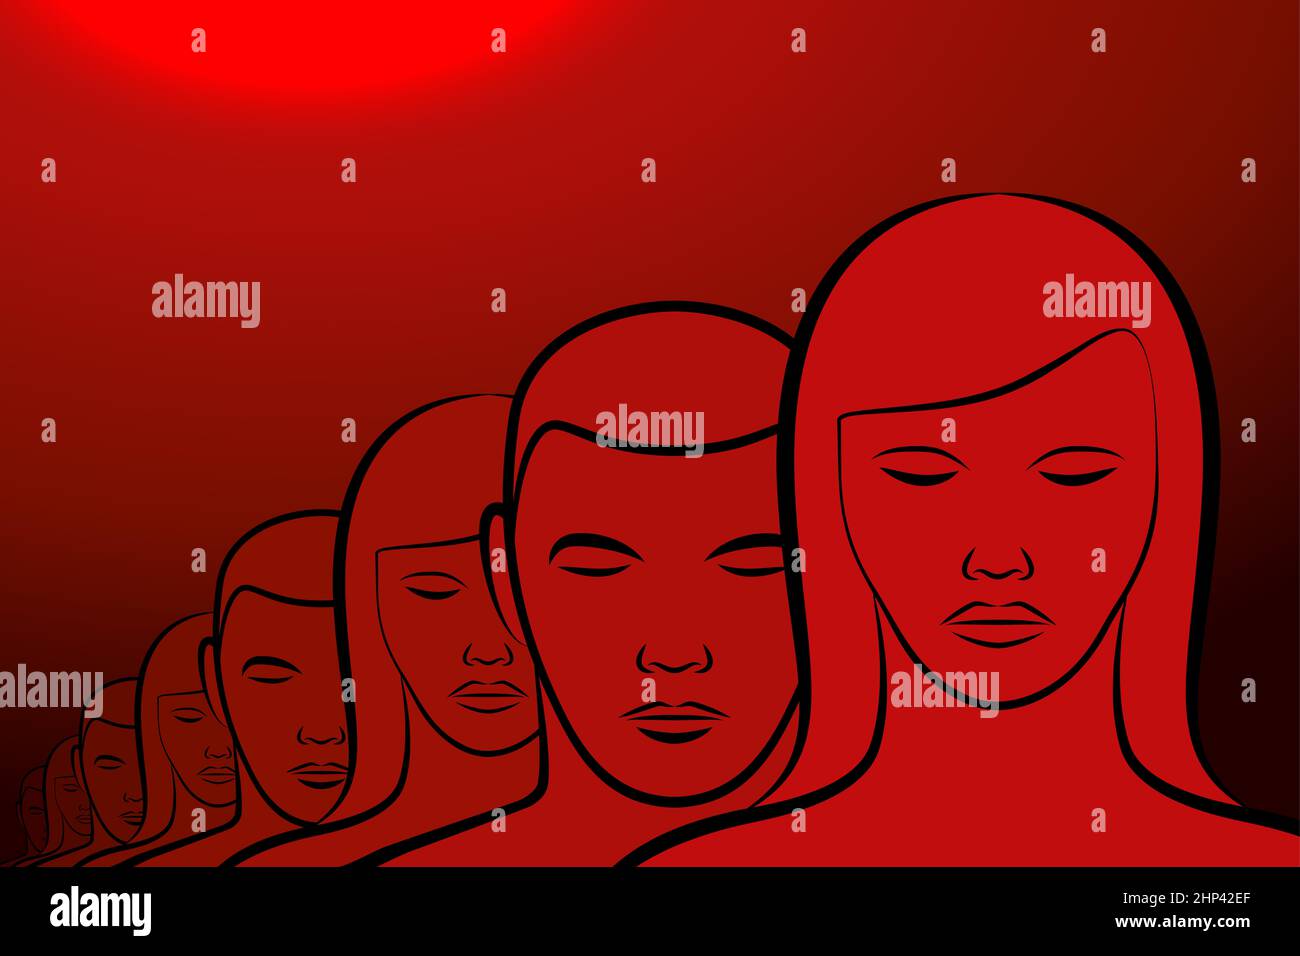 Hypnotized. Men and women standing in a row, eyes closed. They got caught in a deep sleep-like hypnosis. Stock Photo